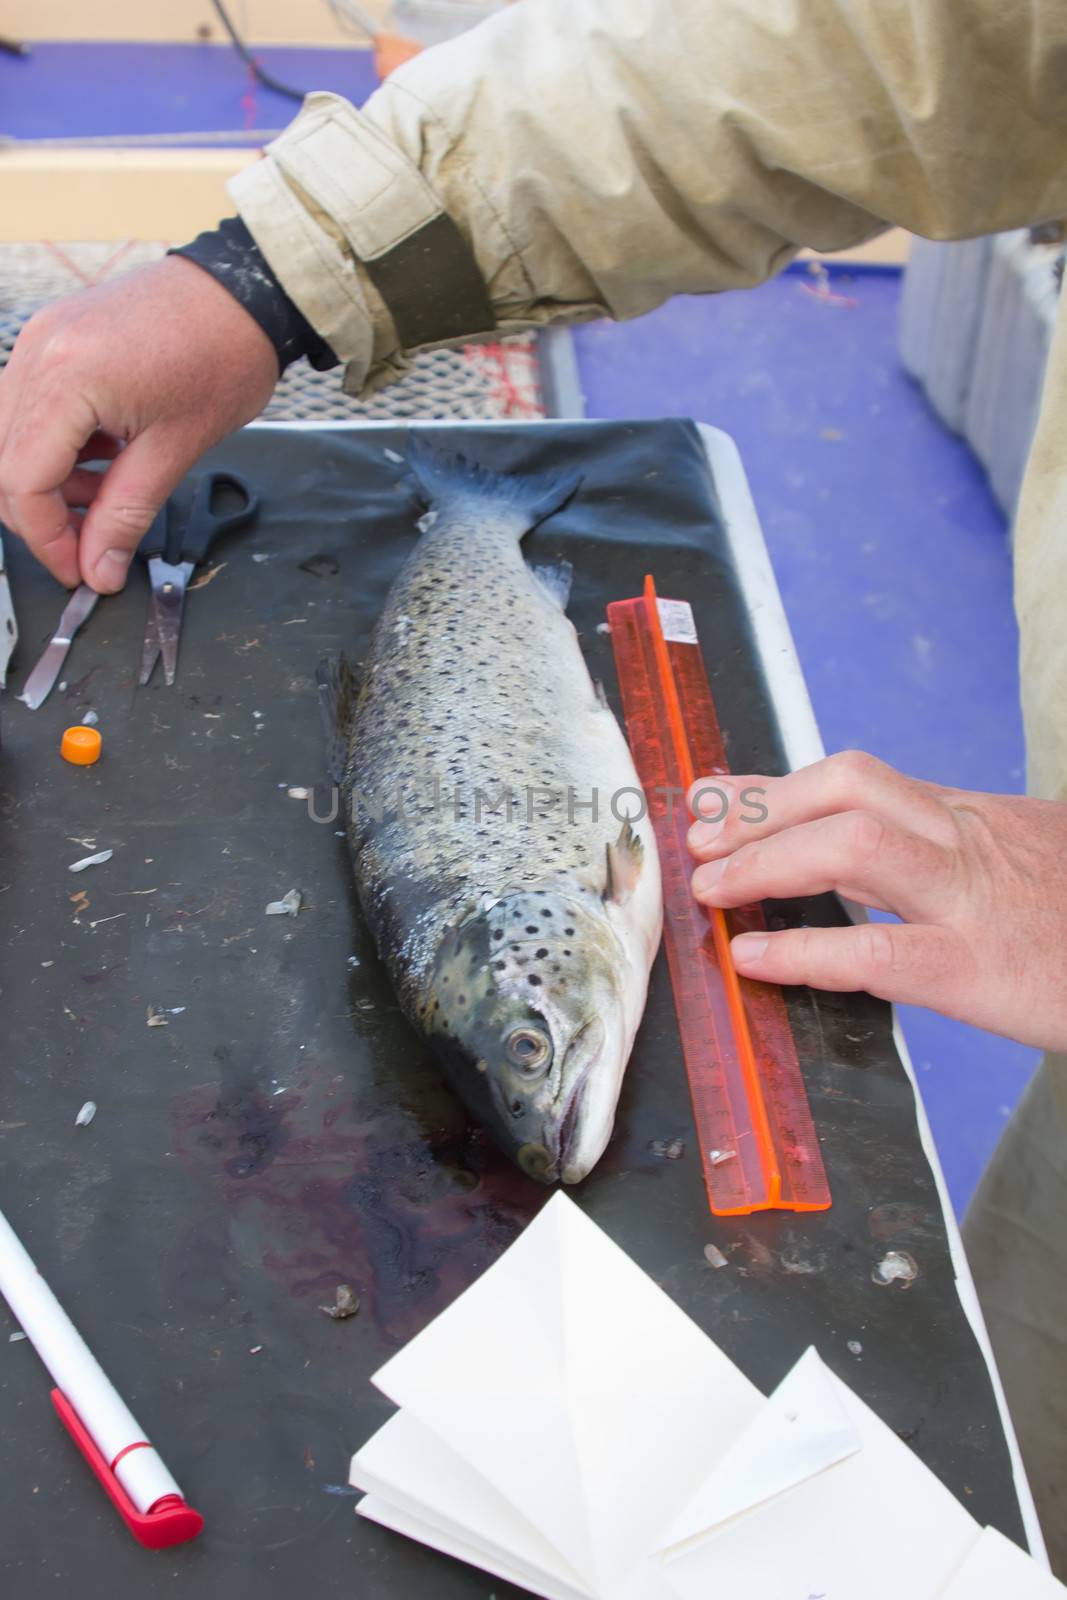 icthyological researches of a salmon on a table at the scientist